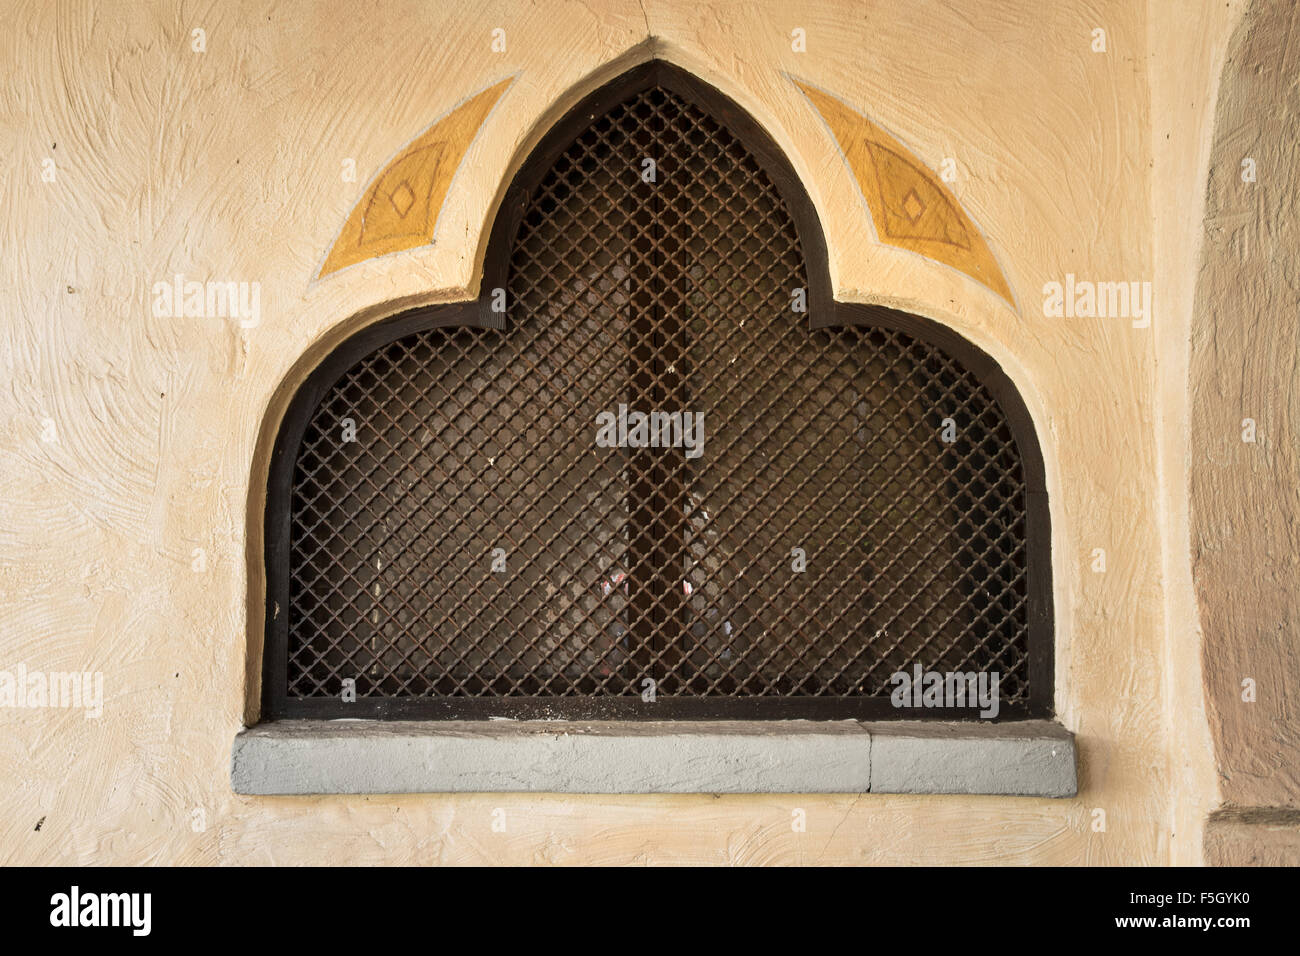 Typical geometry of the Arabic and Middle Eastern architecture. Stock Photo